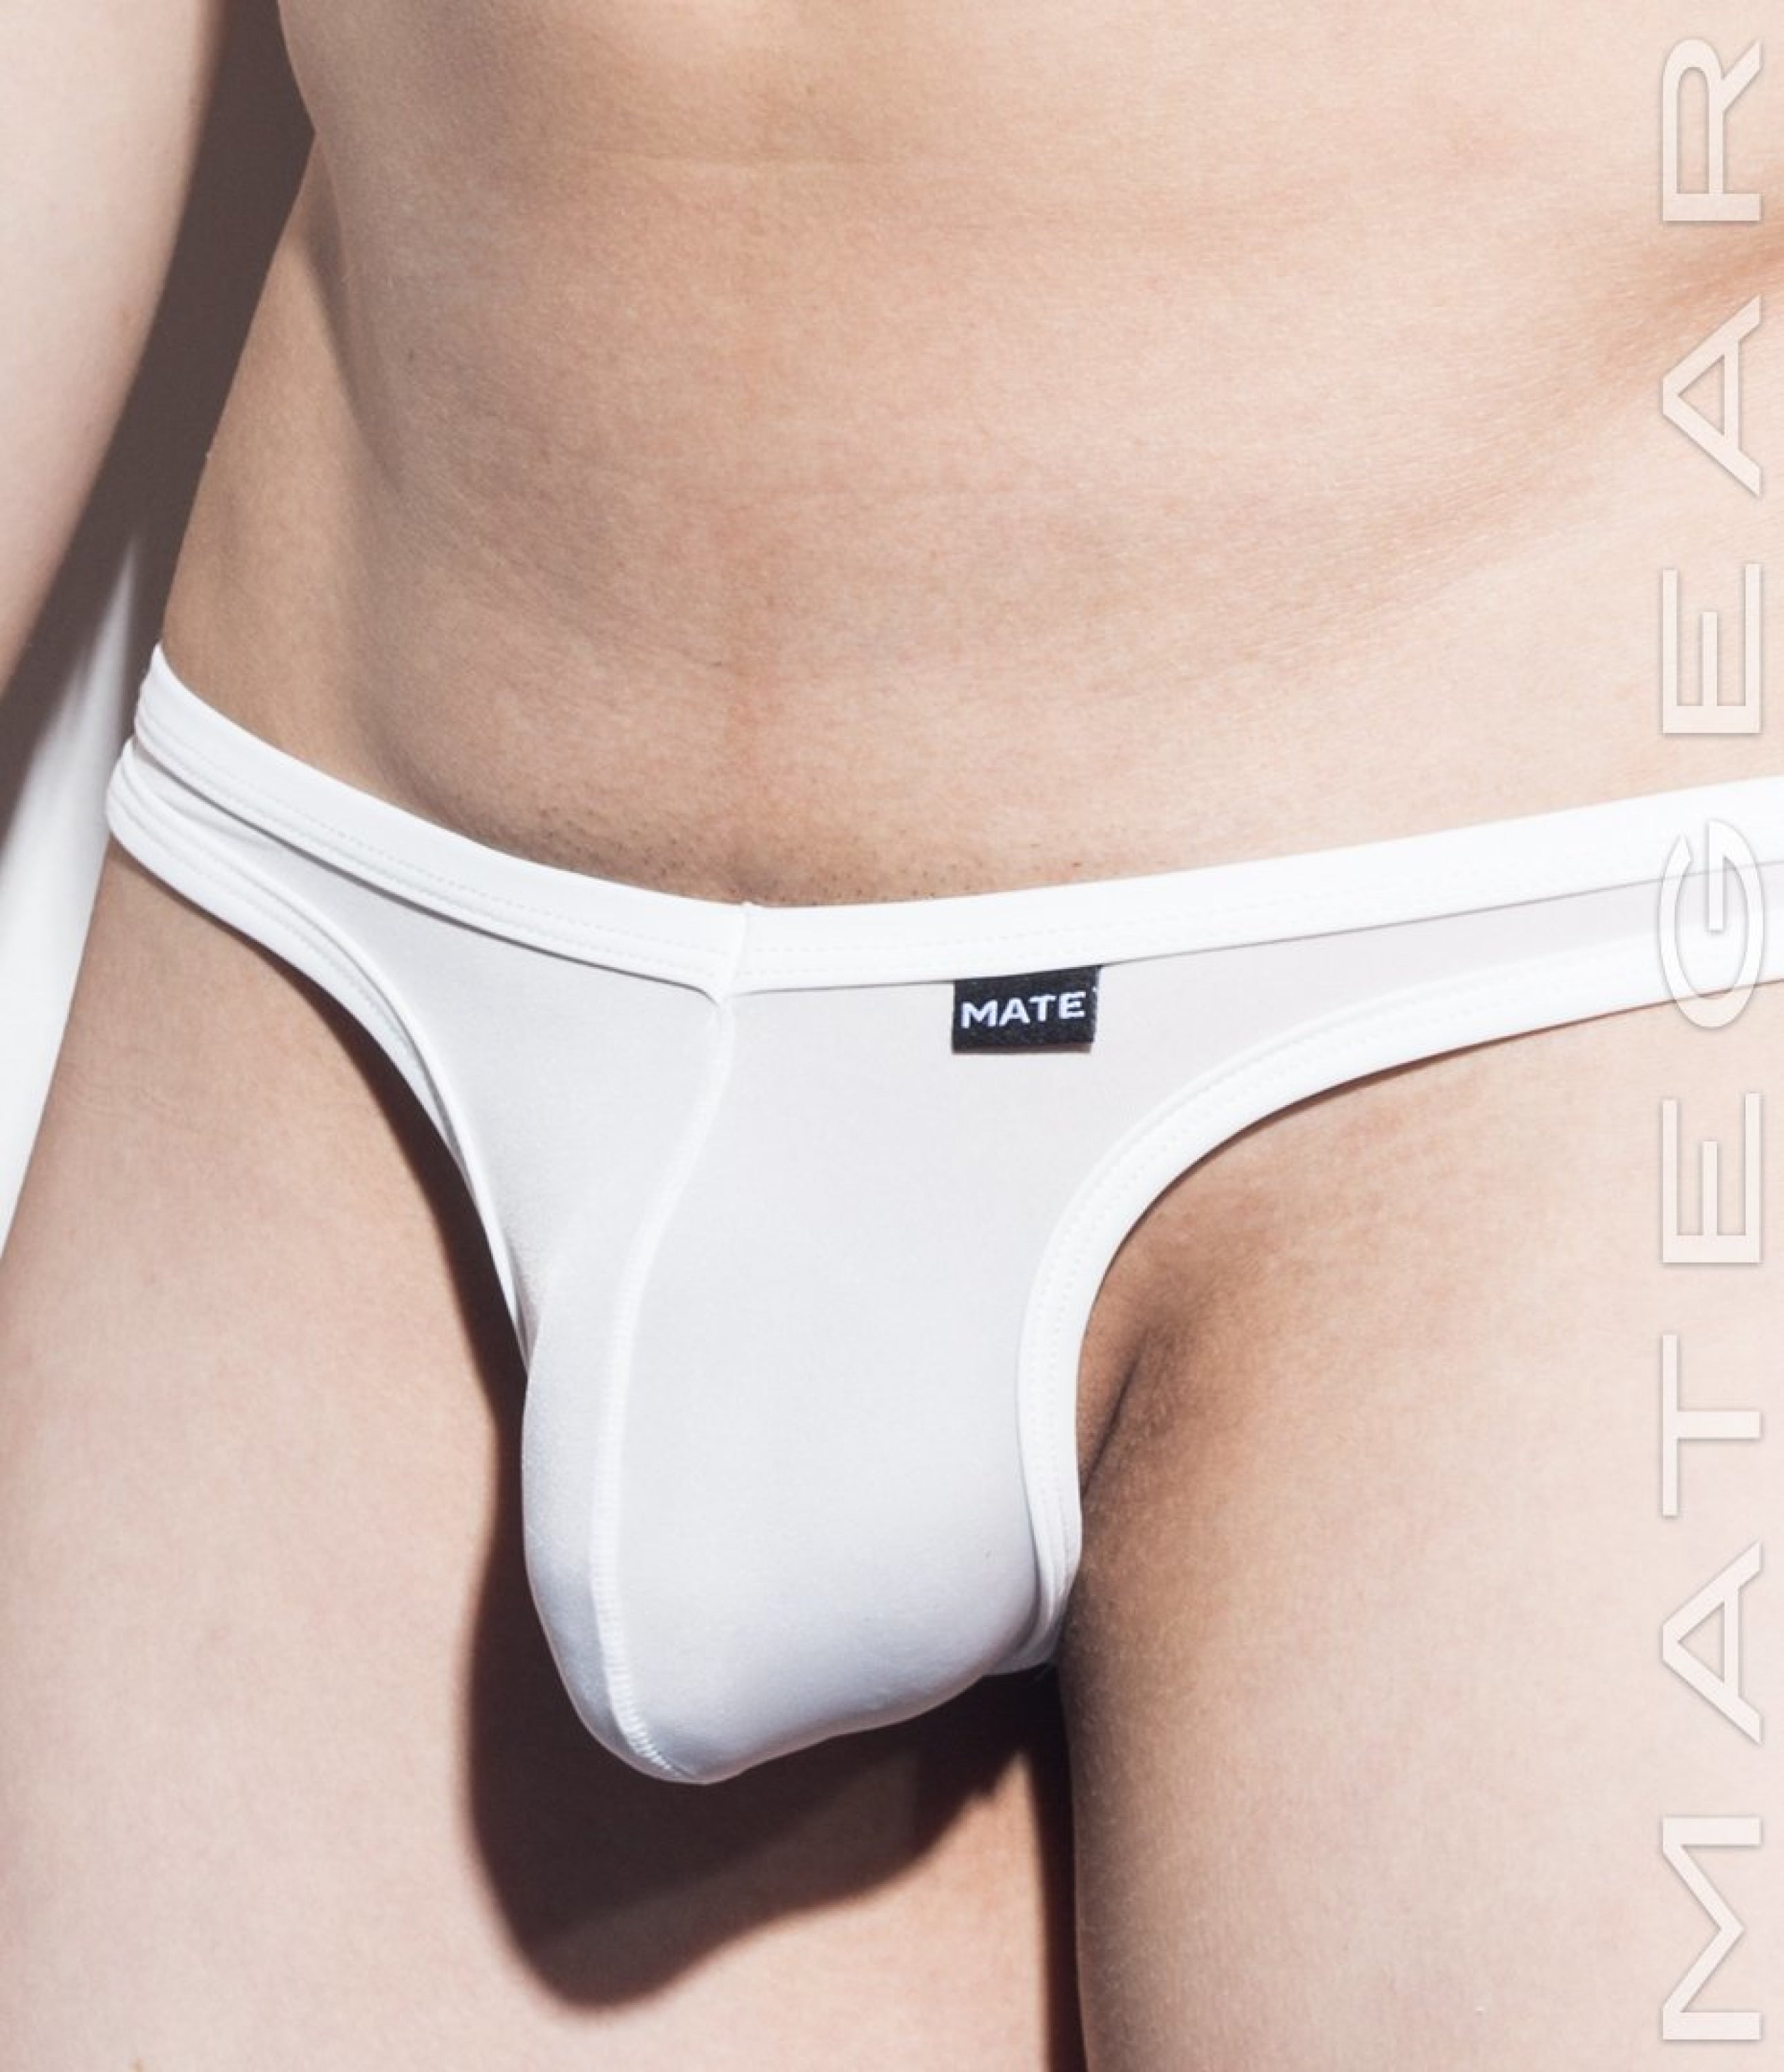 Sexy Men's Underwear Signature Ultra Thongs - Kyo Ha (Ultra Thin Nylon Series / V Front / Tapered Sides) - MATEGEAR - Sexy Men's Swimwear, Underwear, Sportswear and Loungewear